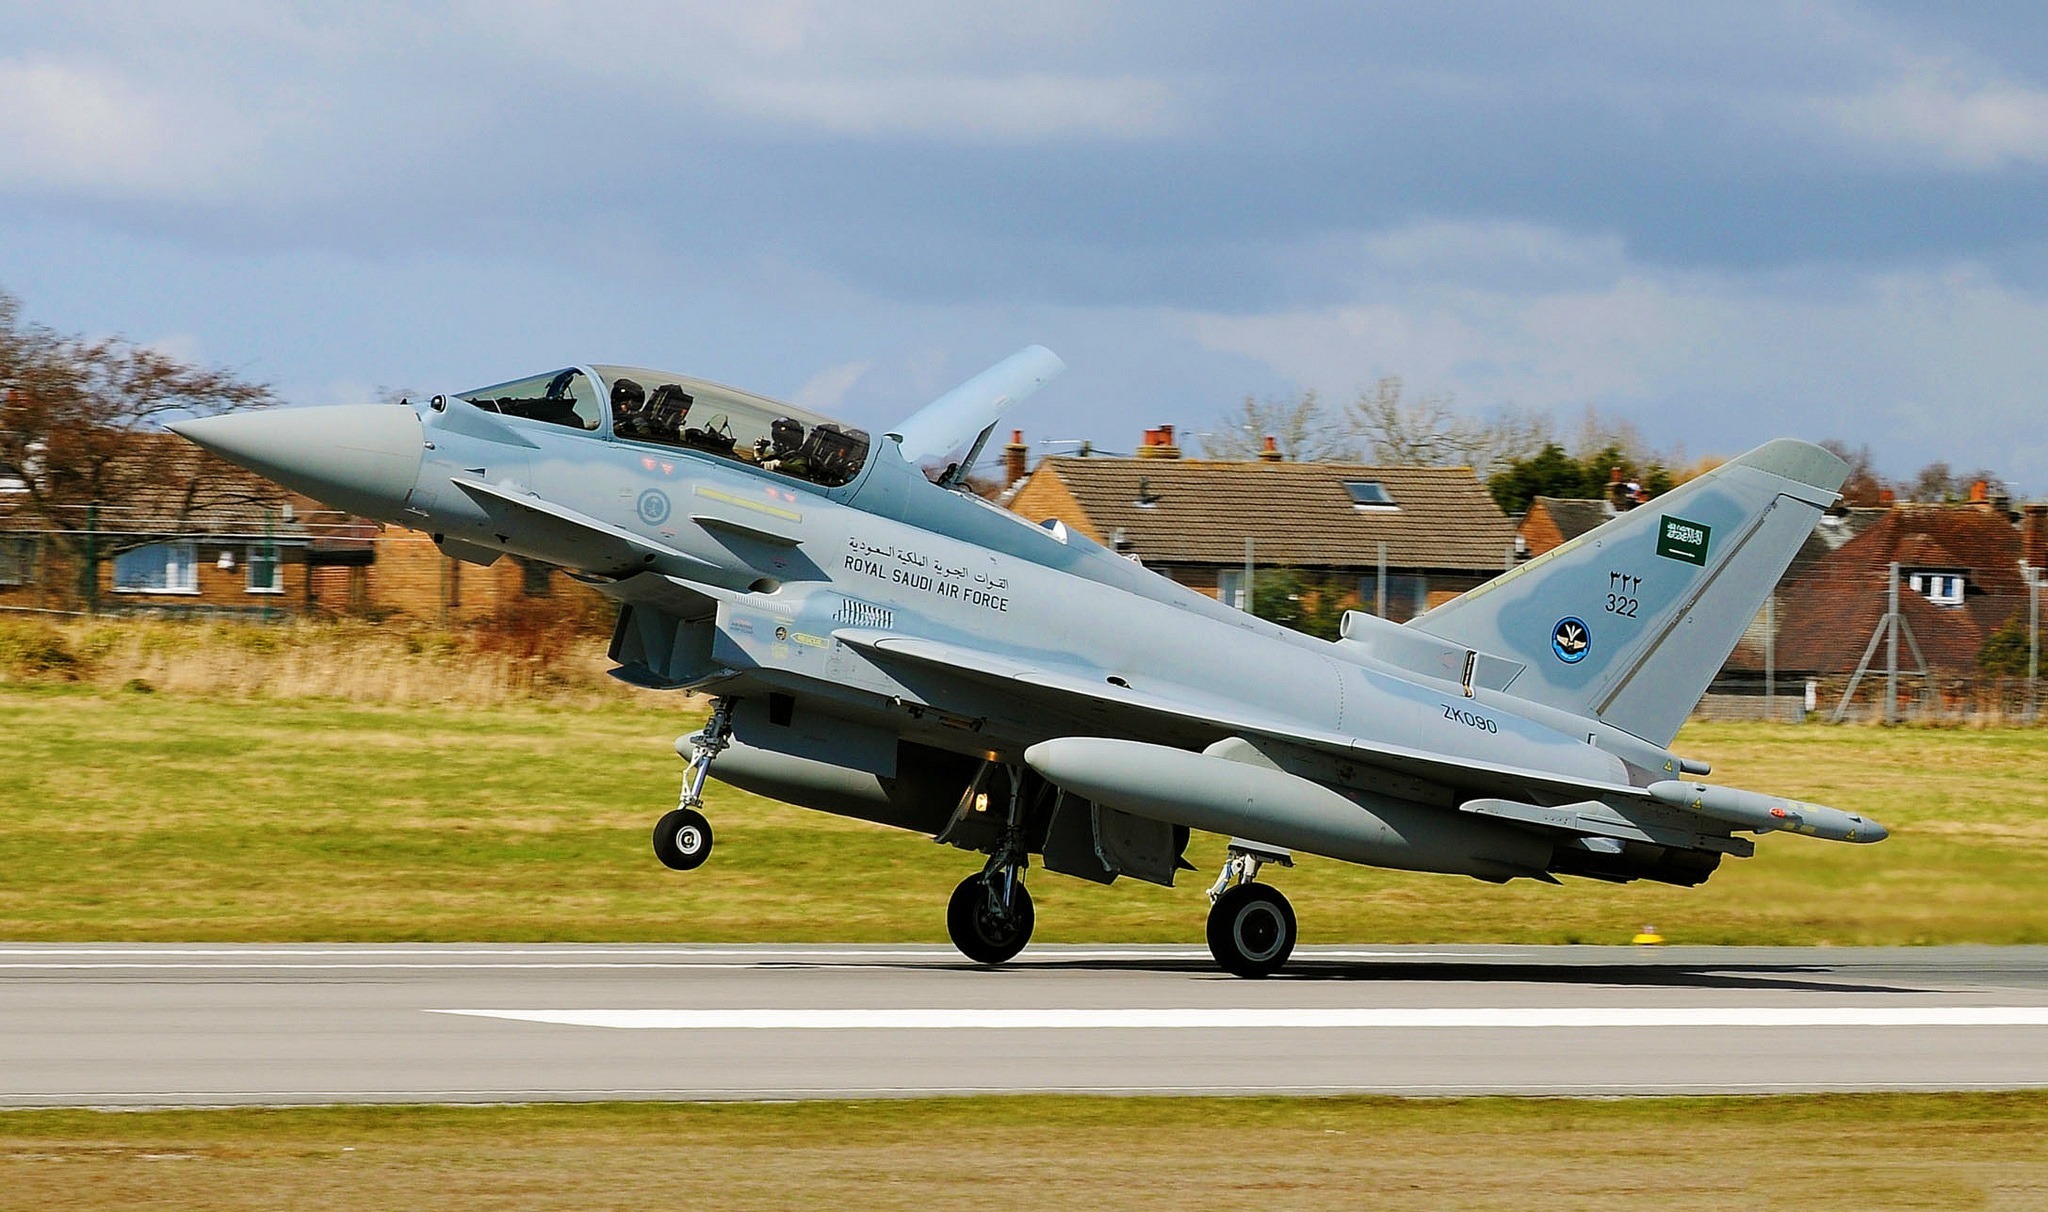 A British-built Eurofighter Typhoon fighter jet, belonging to the Royal Saudi Air Force, takes off. (Photo: Flickr)